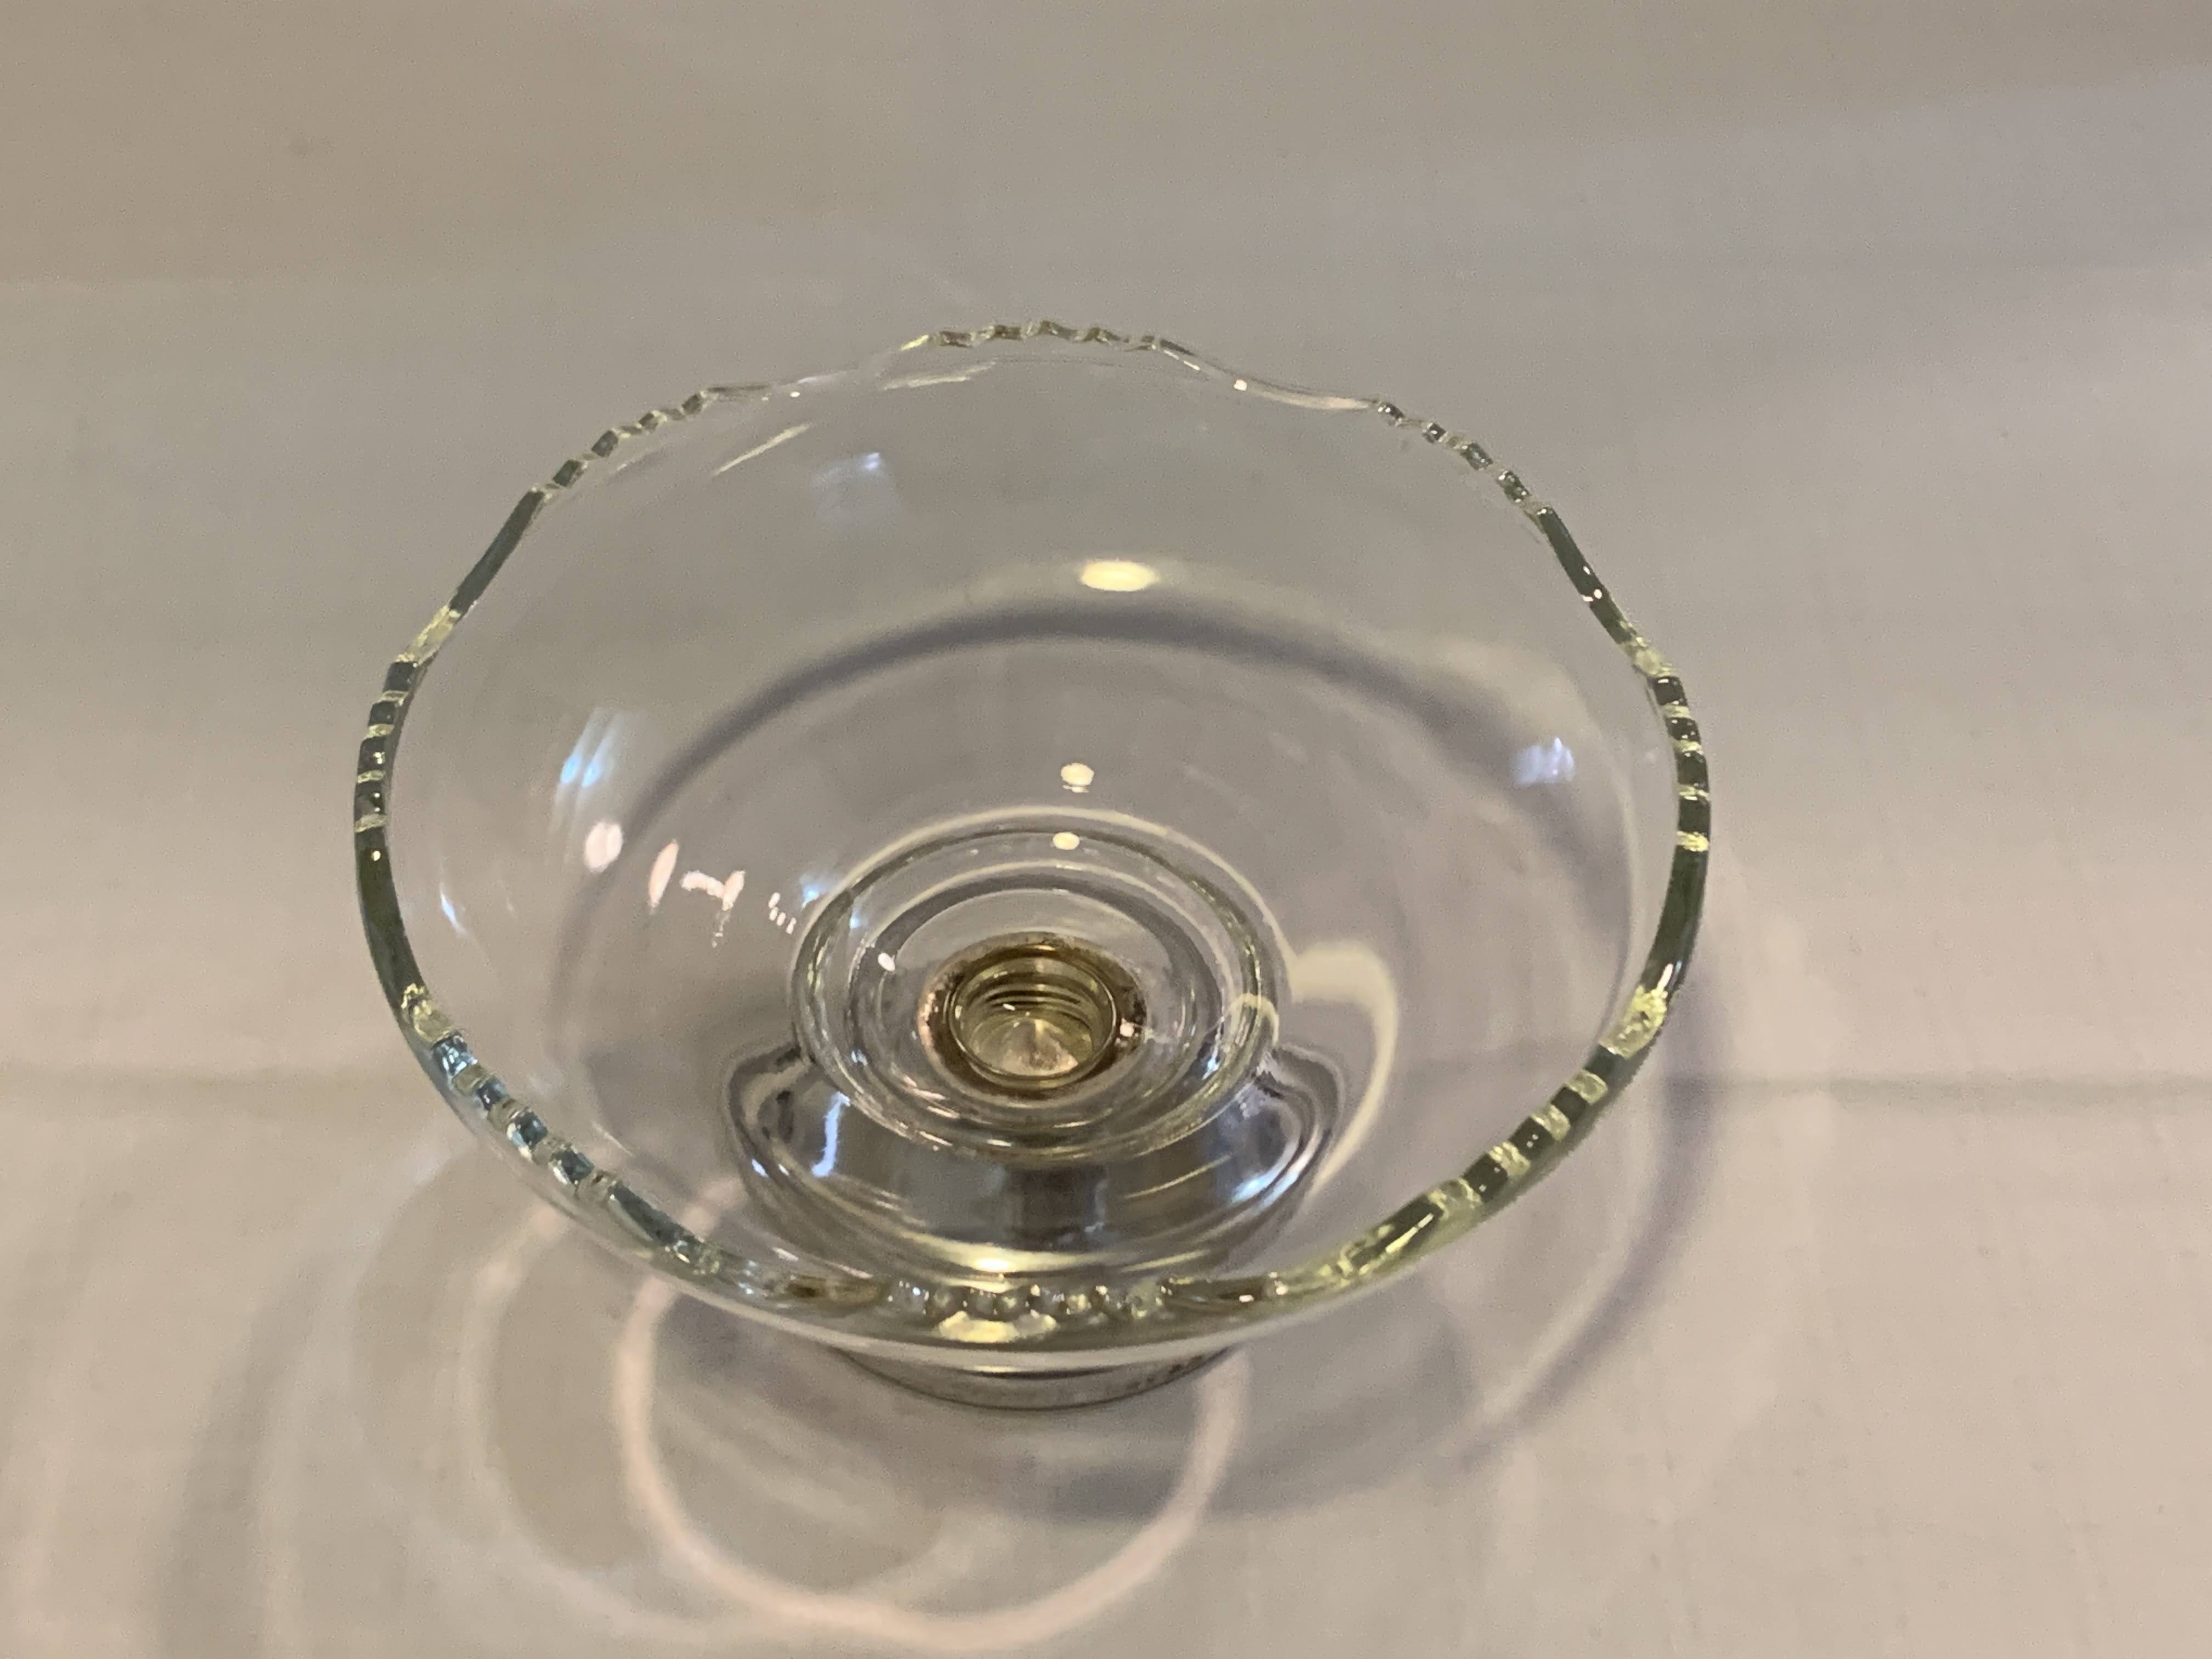 Glass Flower Shape- Mid Century Condiment Bowl - Silver Plated Base Tray 14